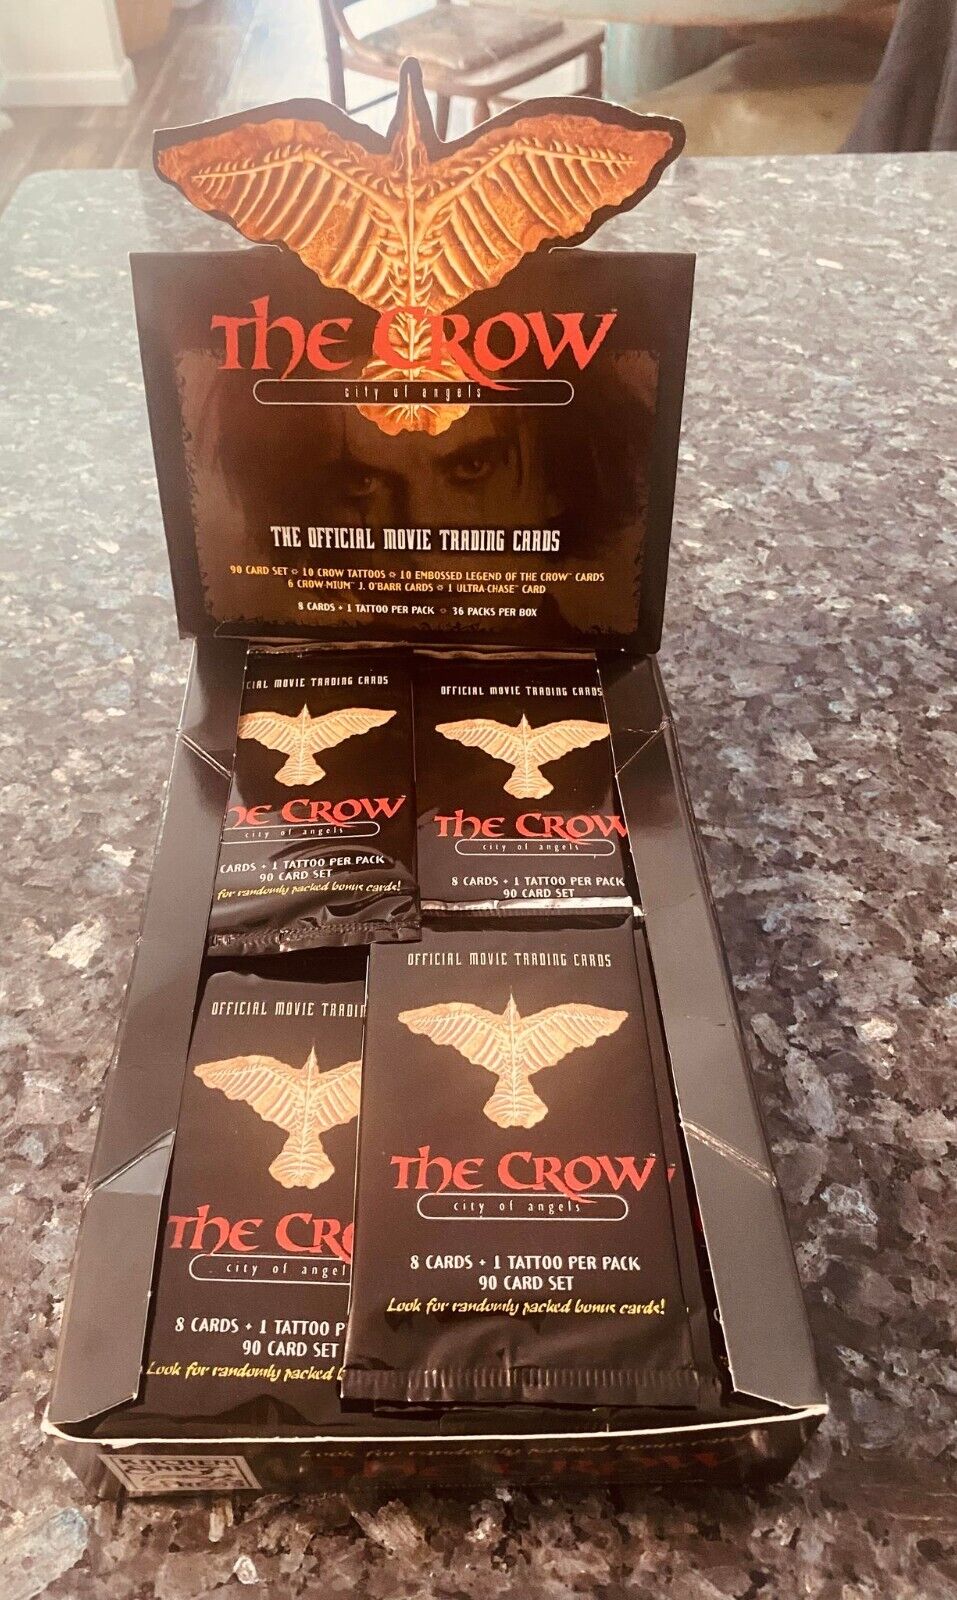 The Crow City of Angels Movie Trading Cards Sealed Box 1996 Kitchen Sink Press